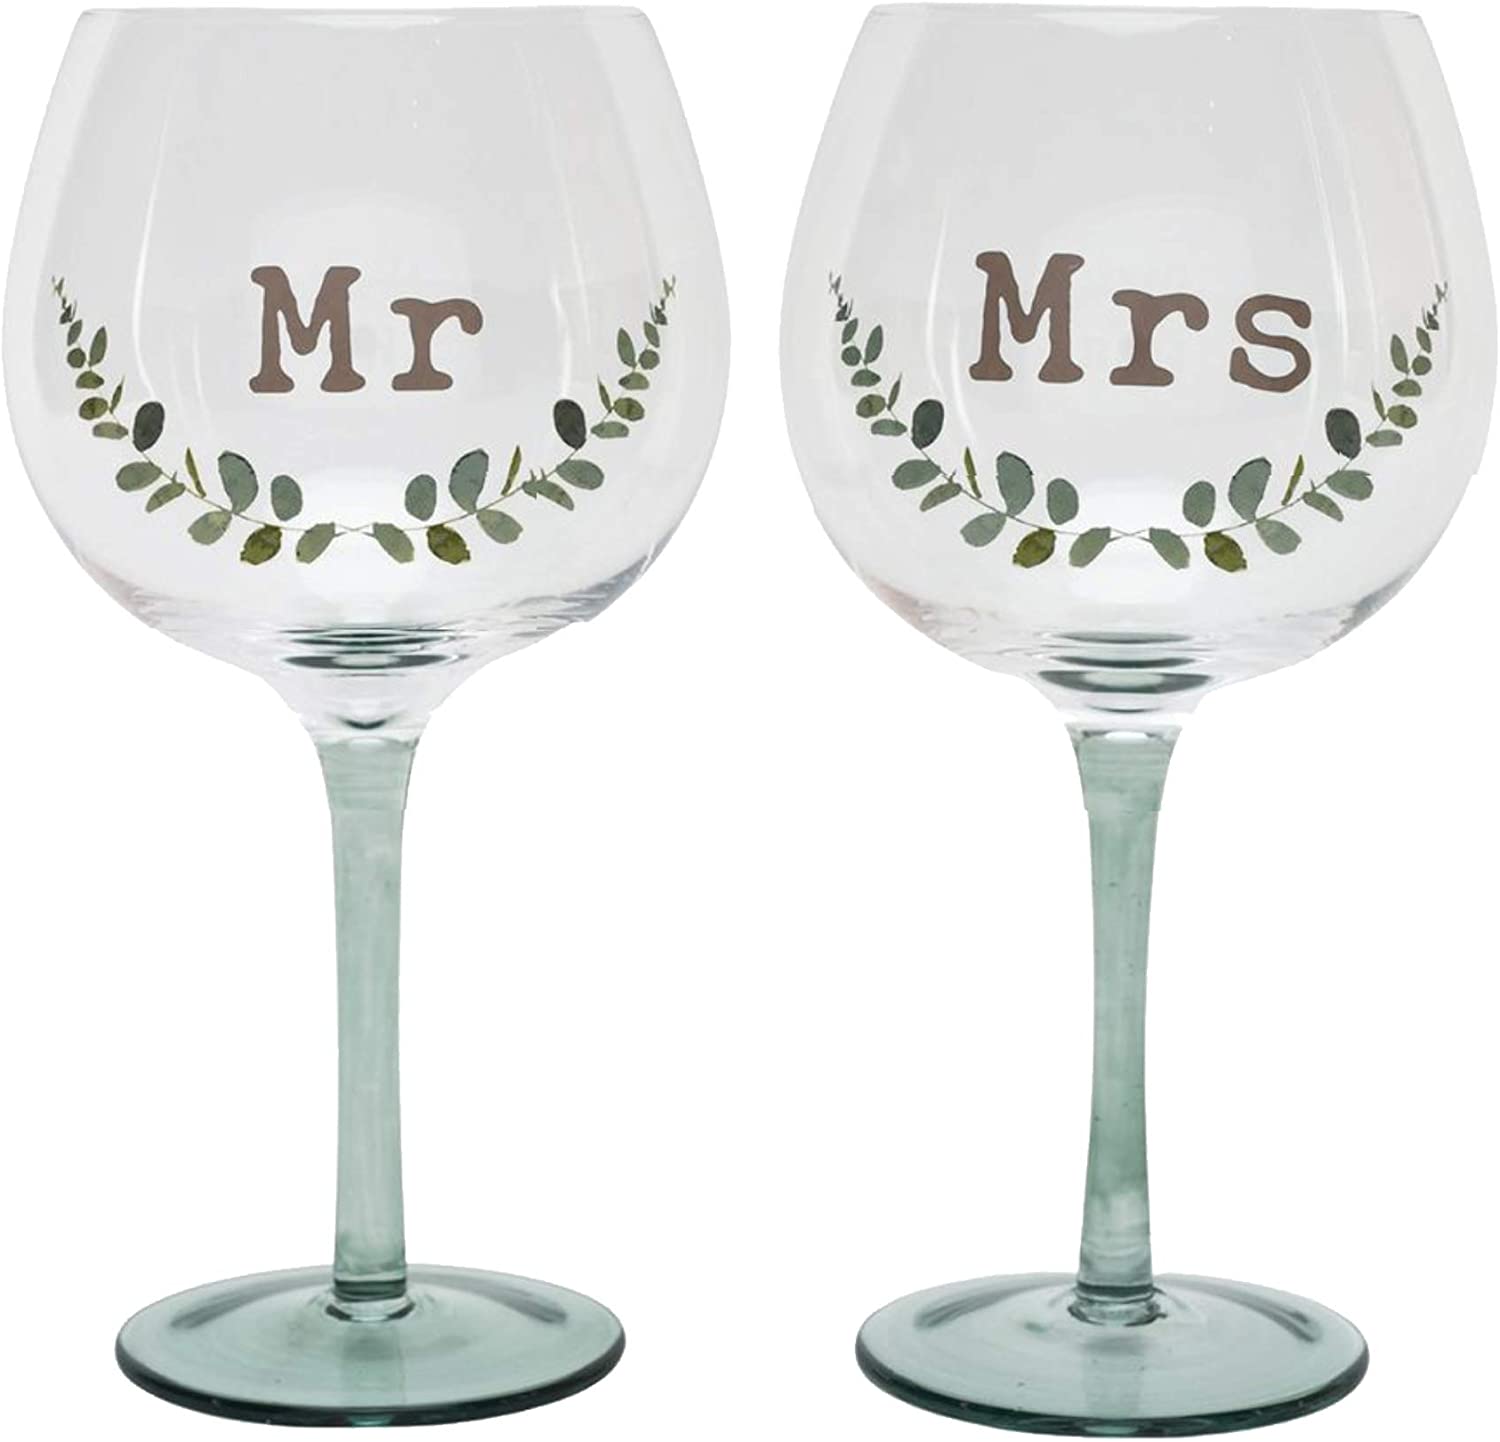 Widdop Love Story Collection Mr and Mrs Gin Glass Wedding Gift Set